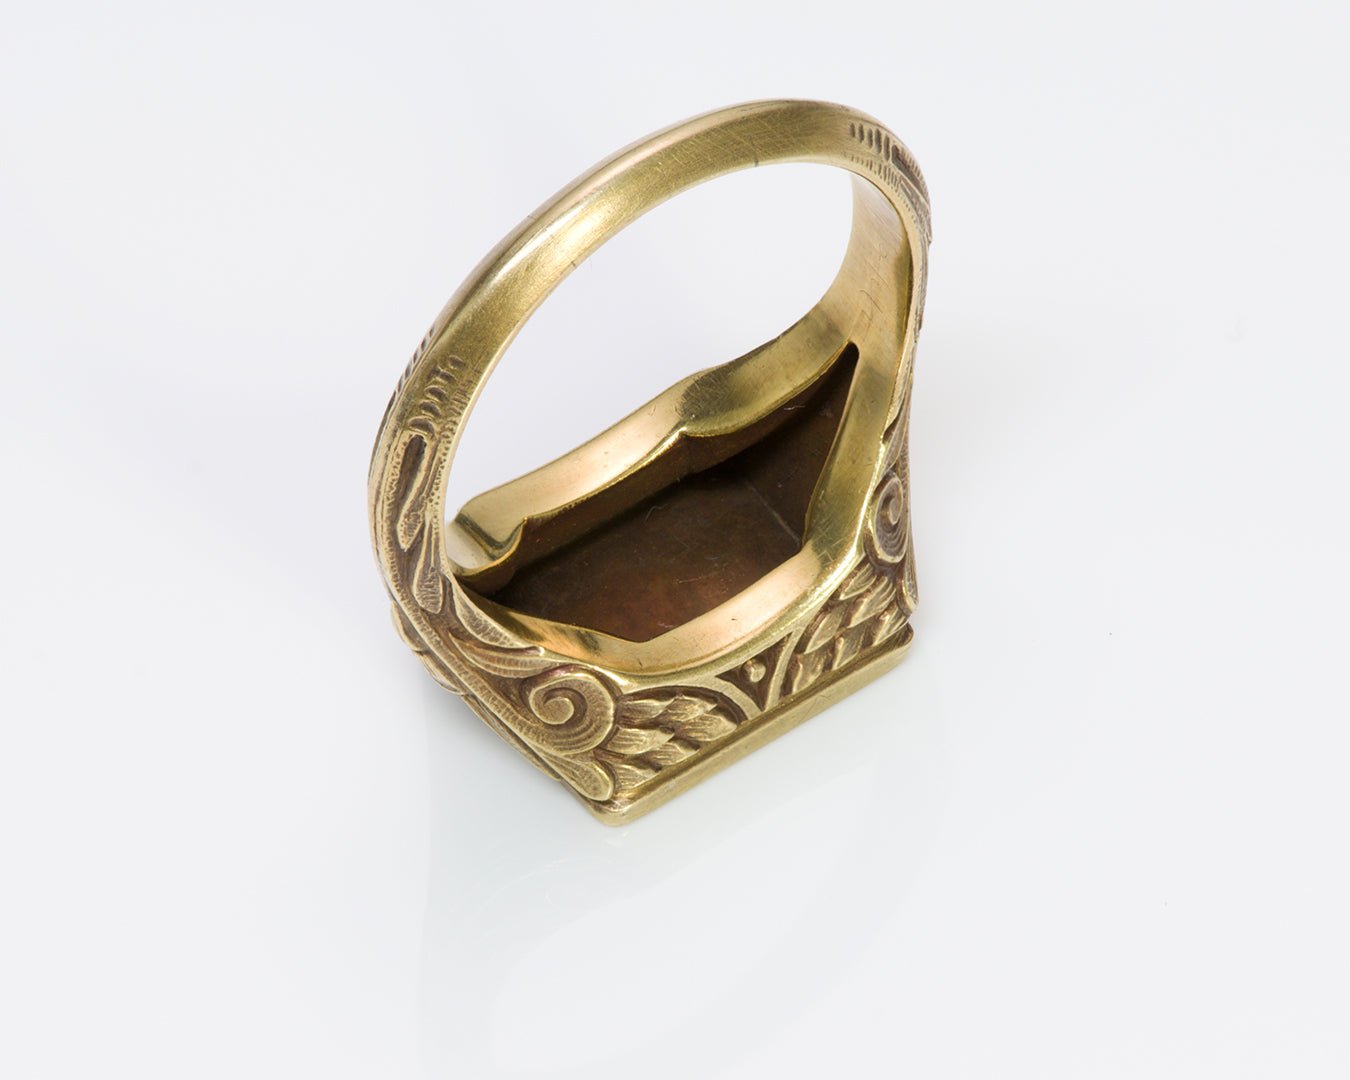 Antique Egyptian Revival Carved Gold Signet Ring